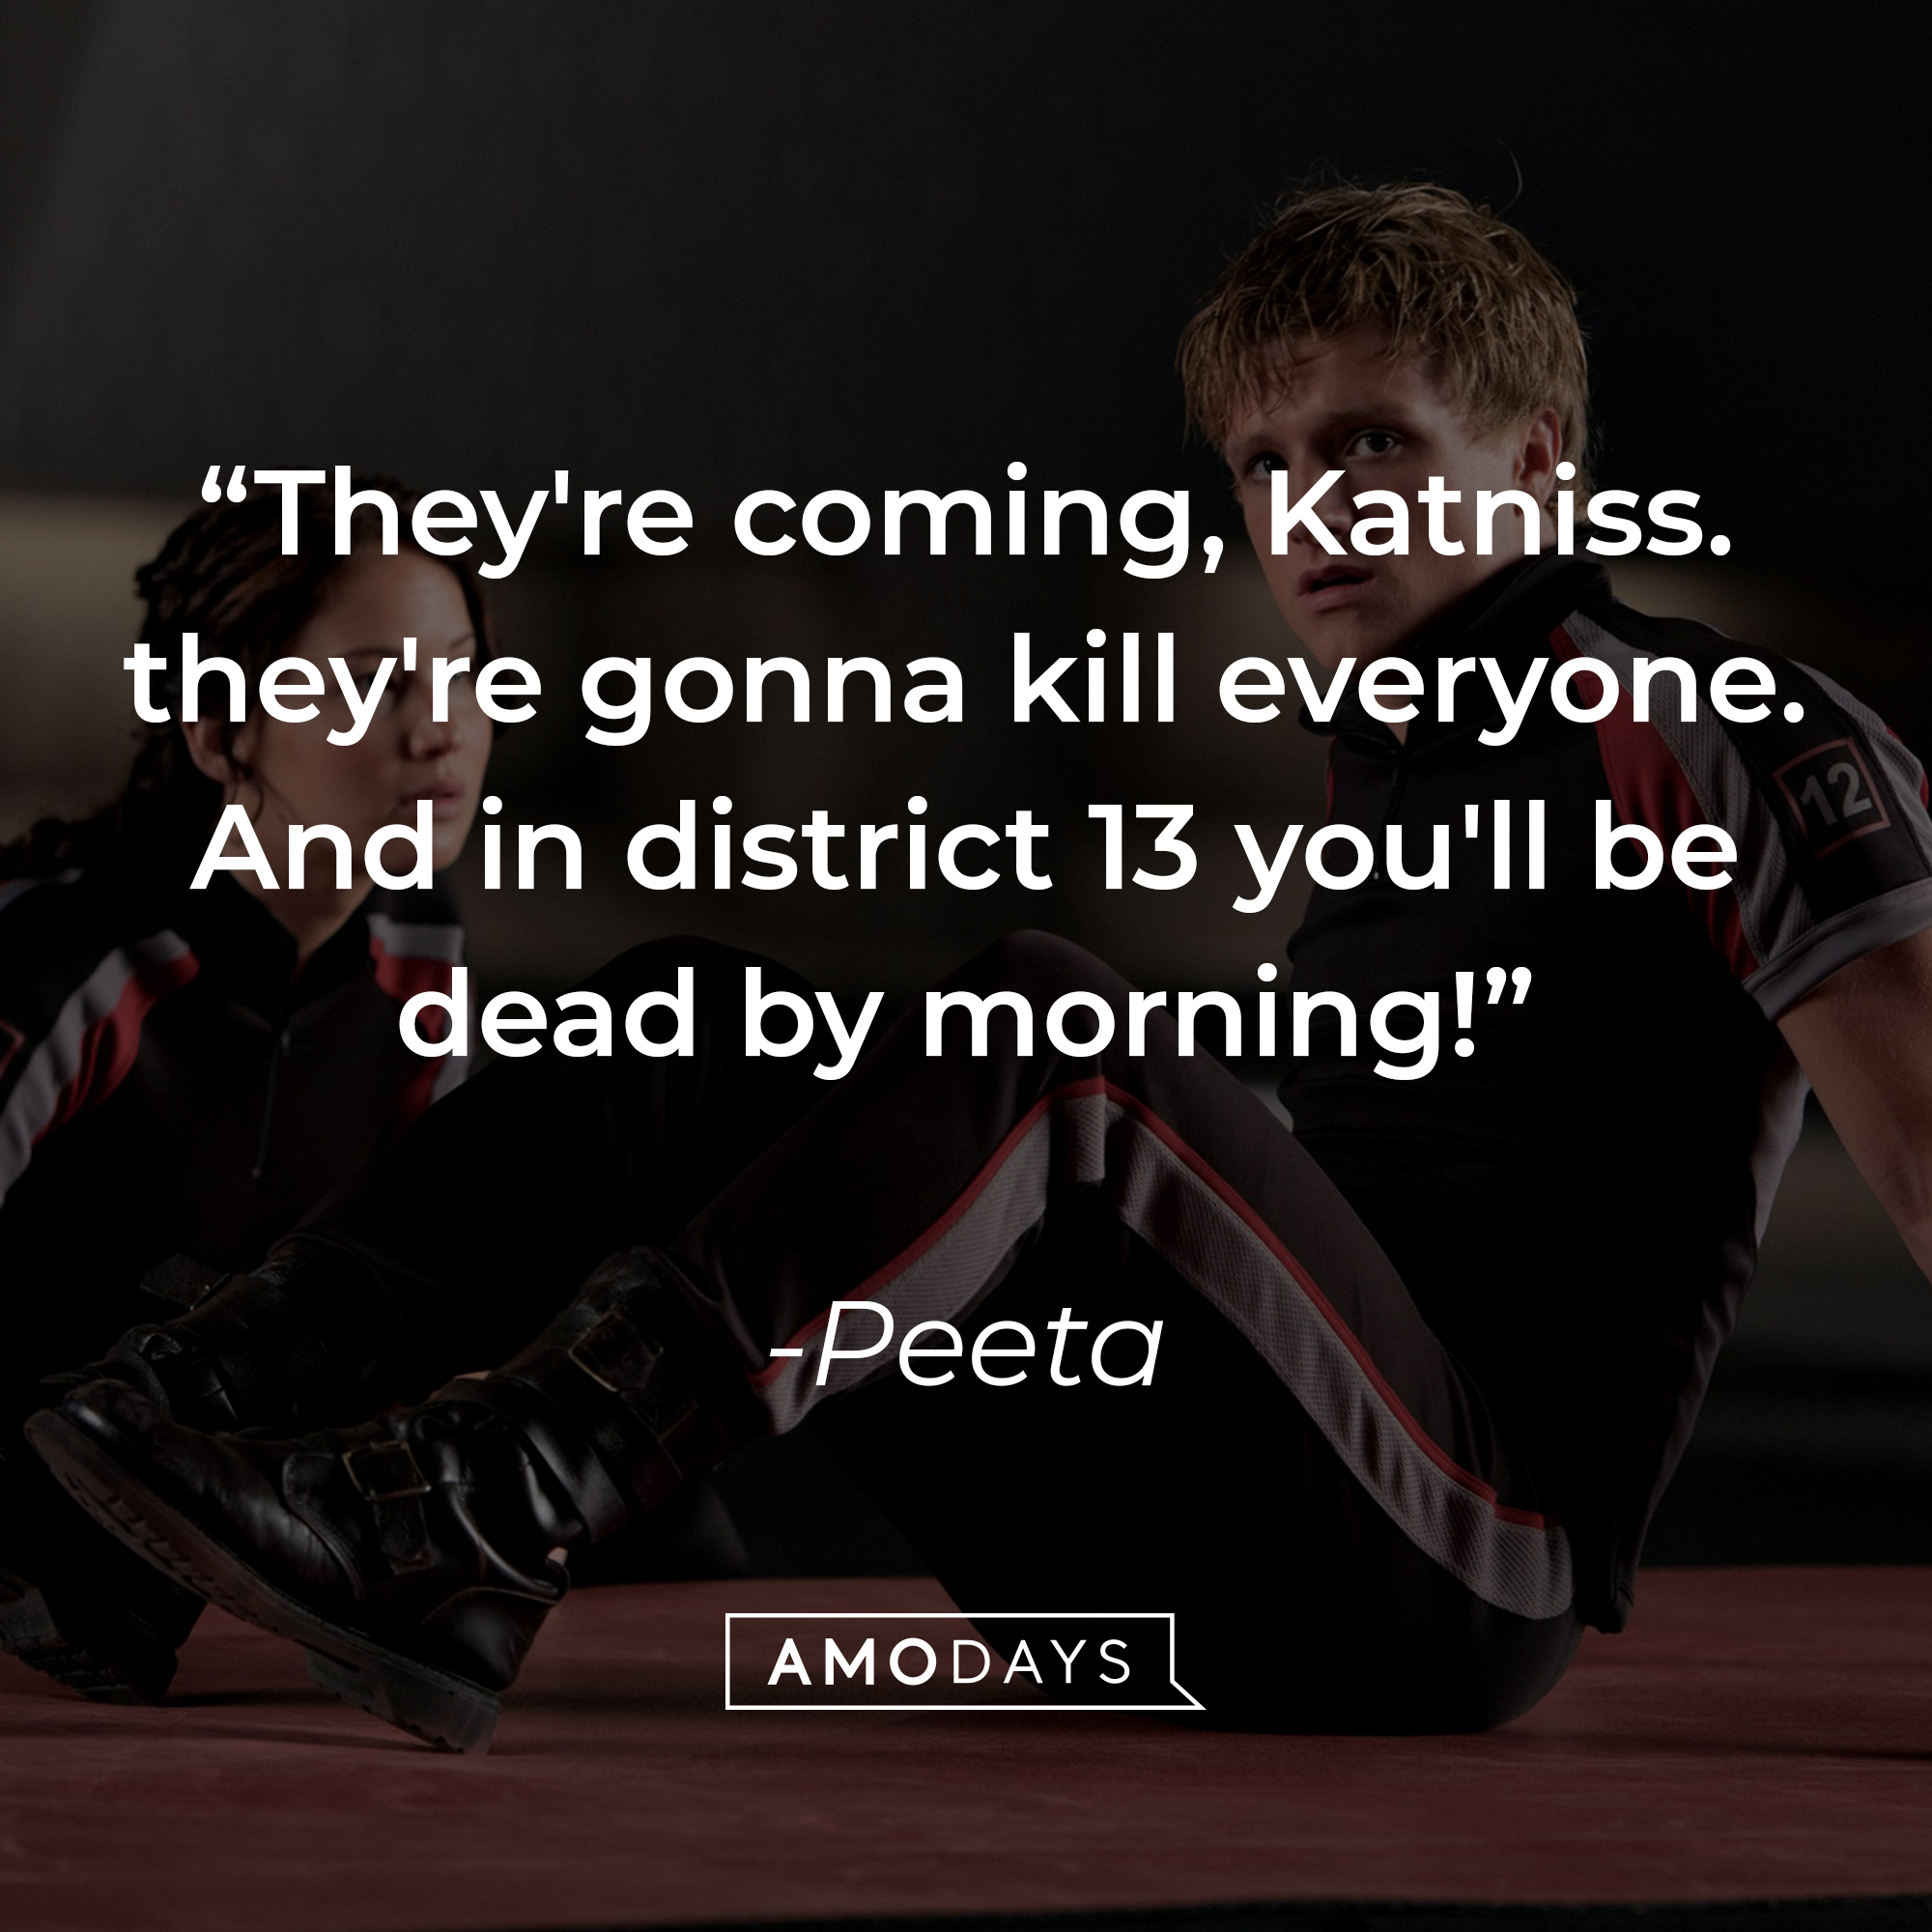 Peeta's quote: "They're coming, Katniss. they're gonna kill everyone. And in district 13 you'll be dead by morning!" | Source: facebook.com/TheHungerGamesMovie